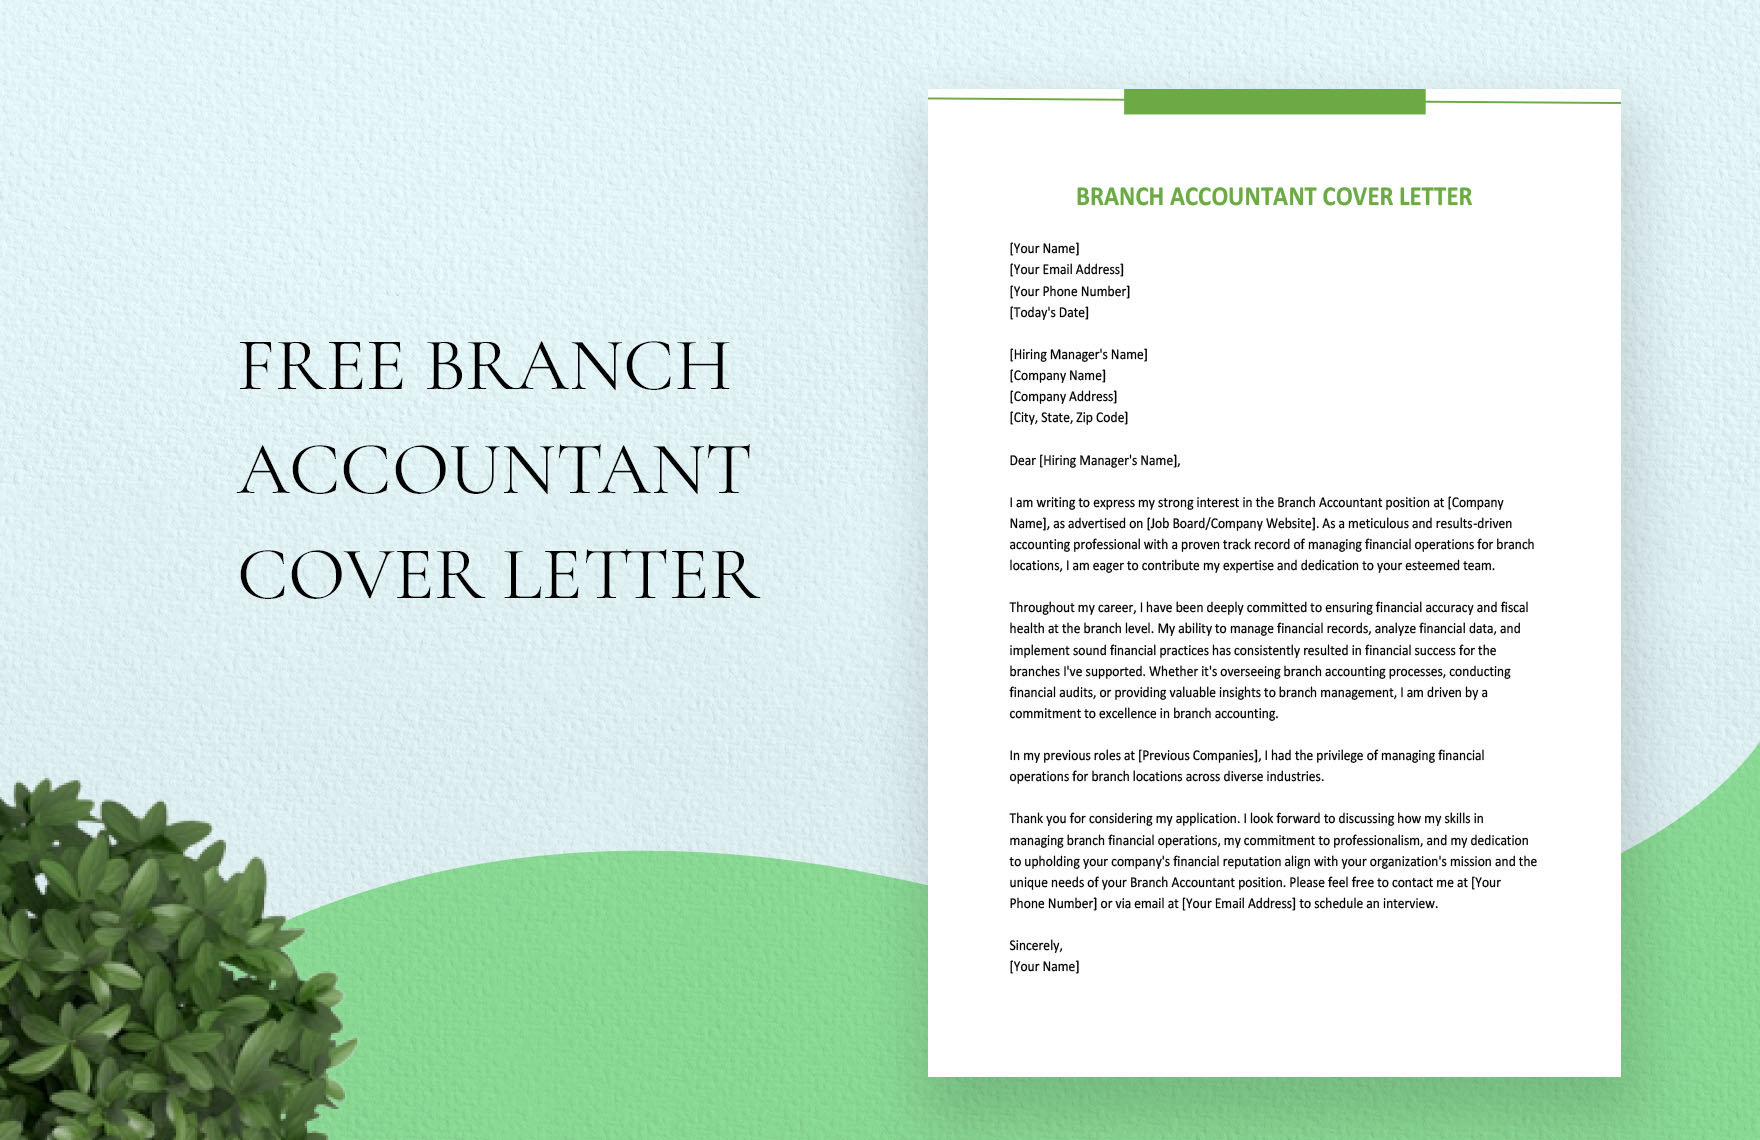 Branch Accountant Cover Letter in Word, Google Docs